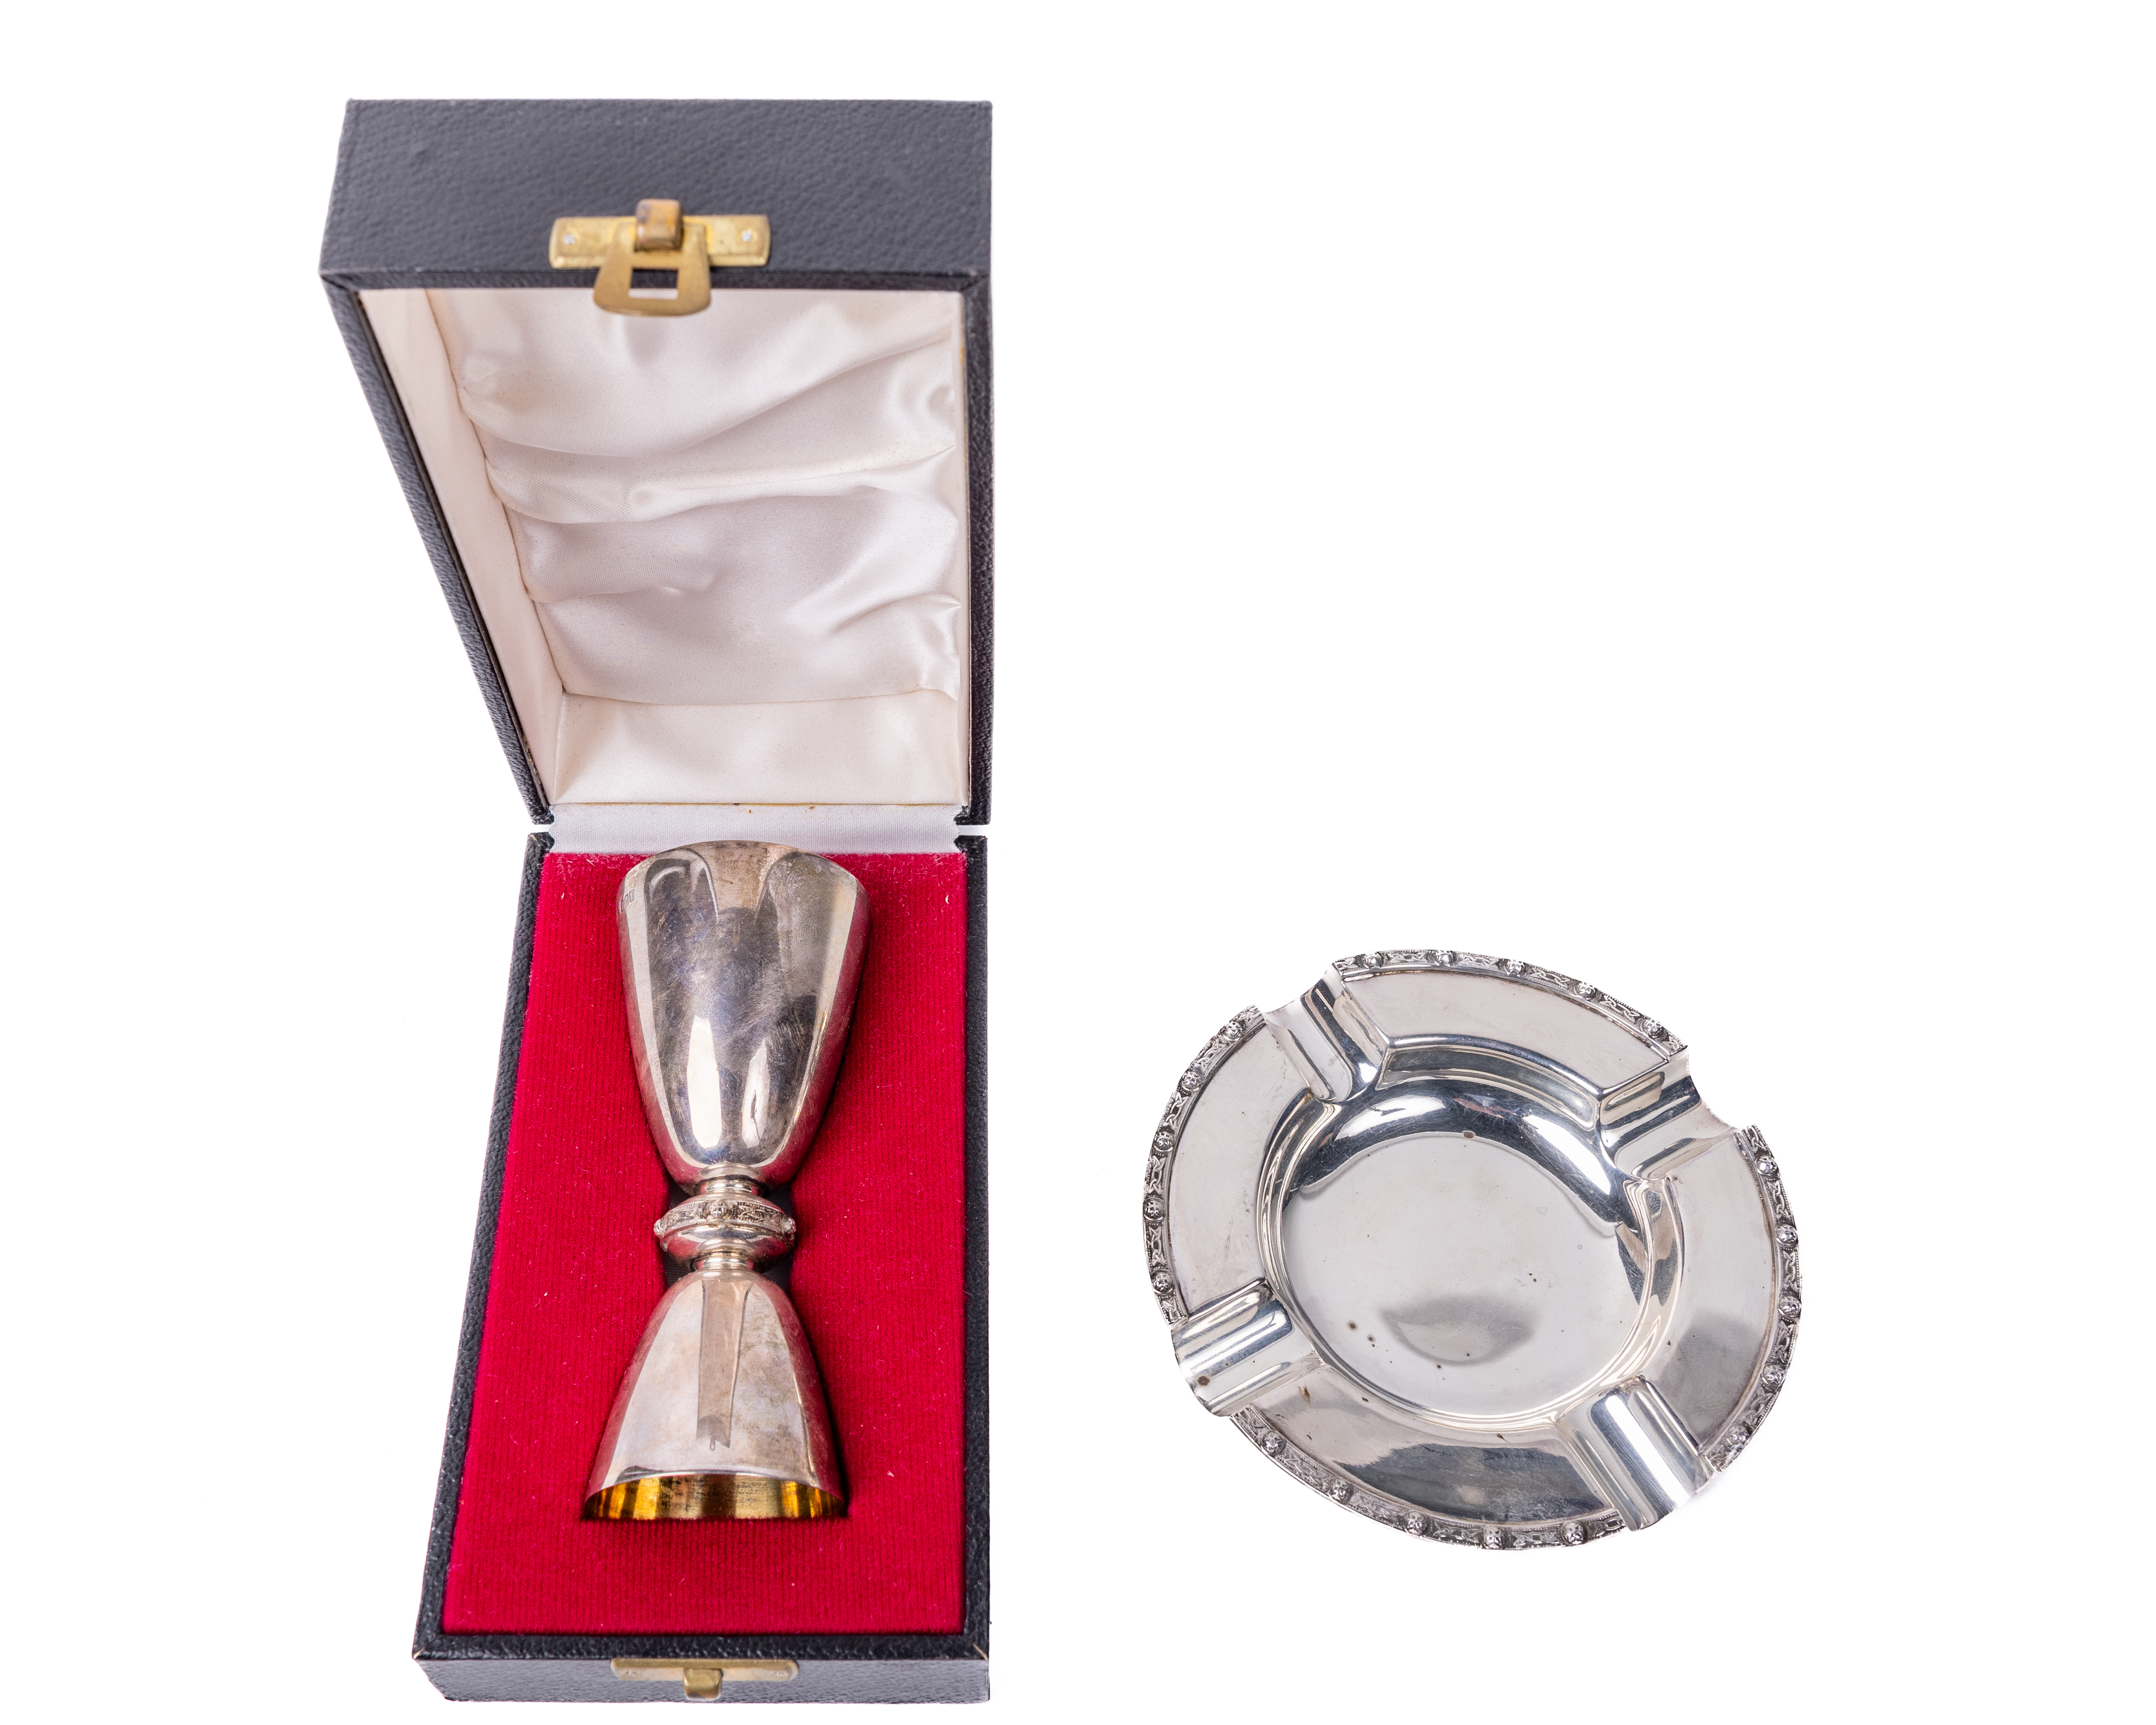 An Irish Celtic design silver double sided Drink Measure by Irish Silver Limited, Dublin, cased;